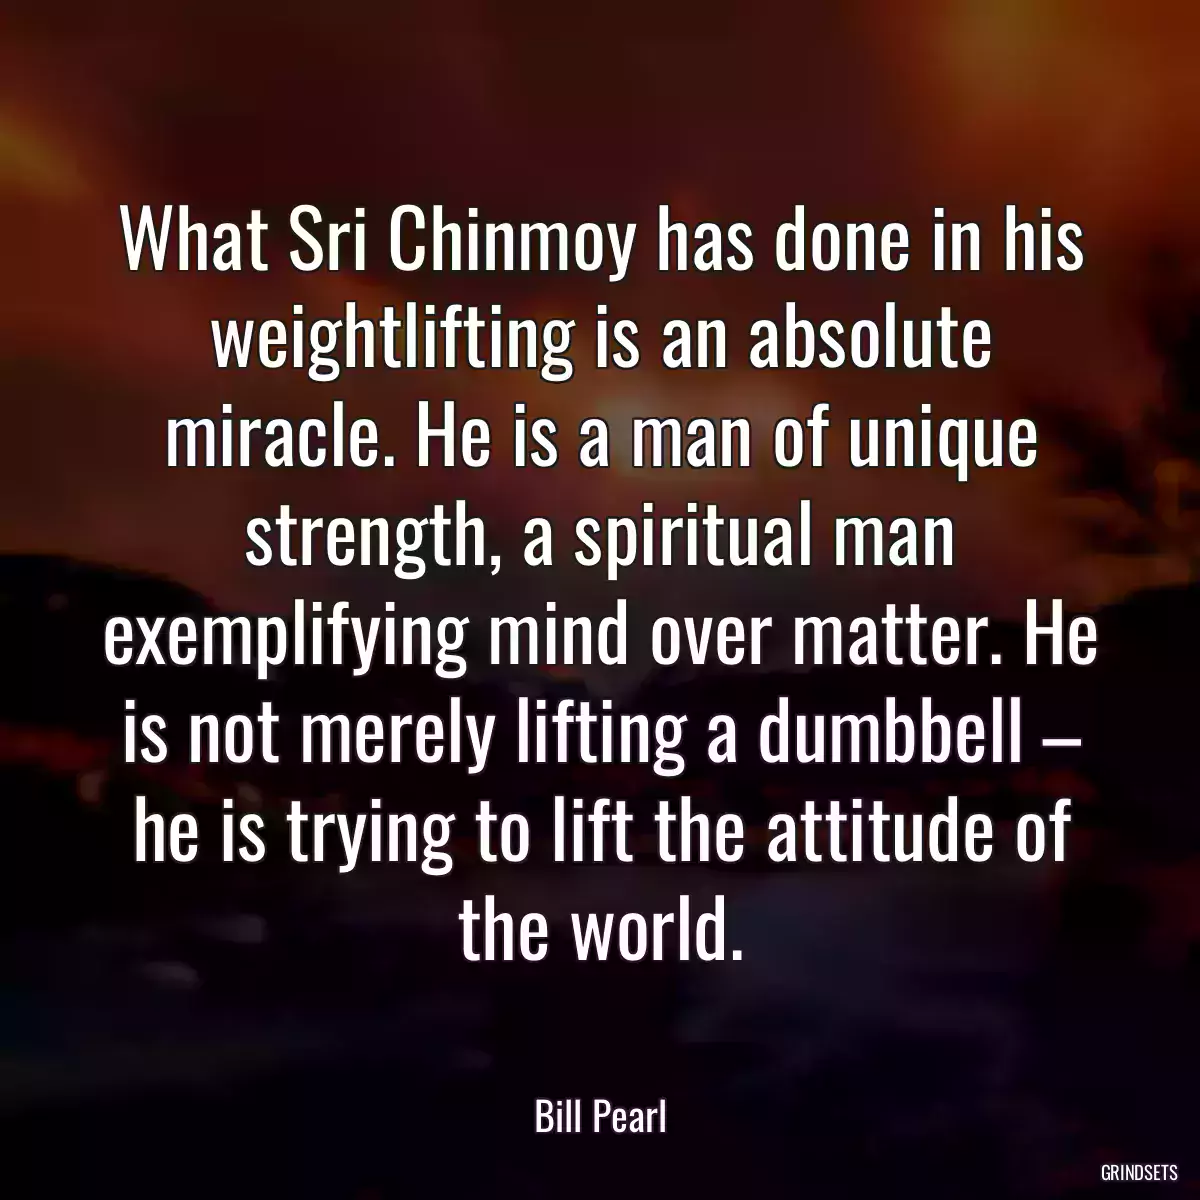 What Sri Chinmoy has done in his weightlifting is an absolute miracle. He is a man of unique strength, a spiritual man exemplifying mind over matter. He is not merely lifting a dumbbell – he is trying to lift the attitude of the world.